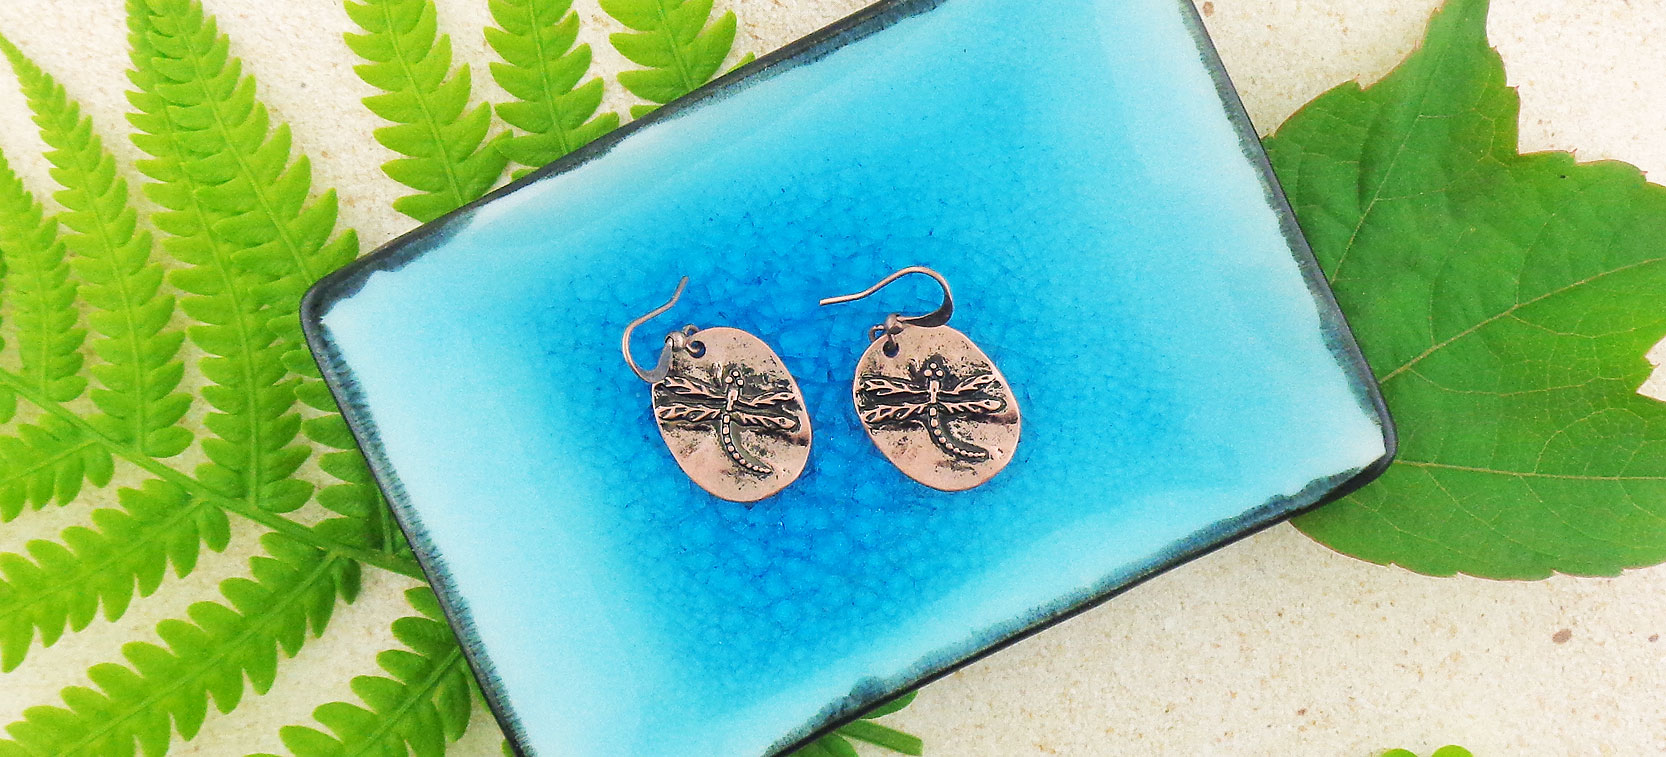 lavishy boutique offers Eco-friendly dragonfly themed vegan fashion accessories & gifts for online shopping. Great dragonfly gift ideas for yourself, friends & family